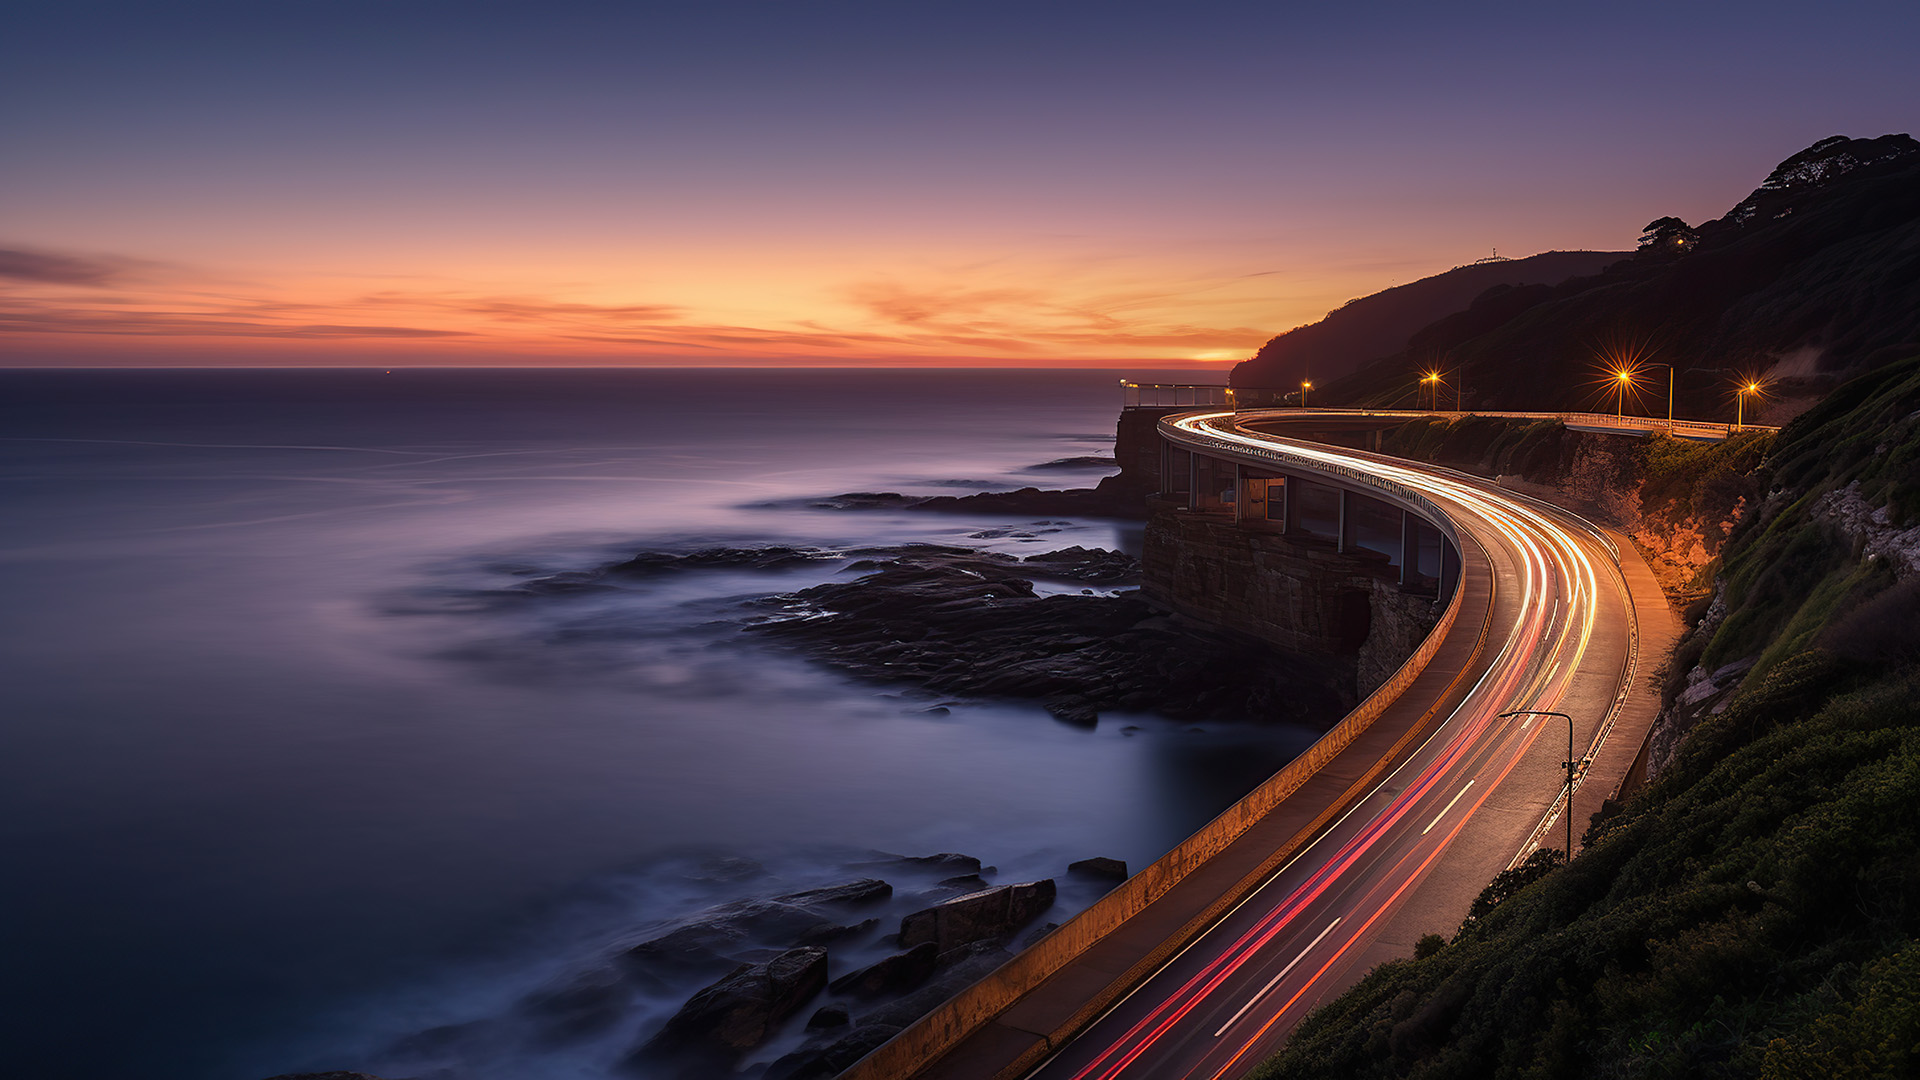 Sunset over the Sea cliff bridge along Pacific ocean coast with lights of passing cars